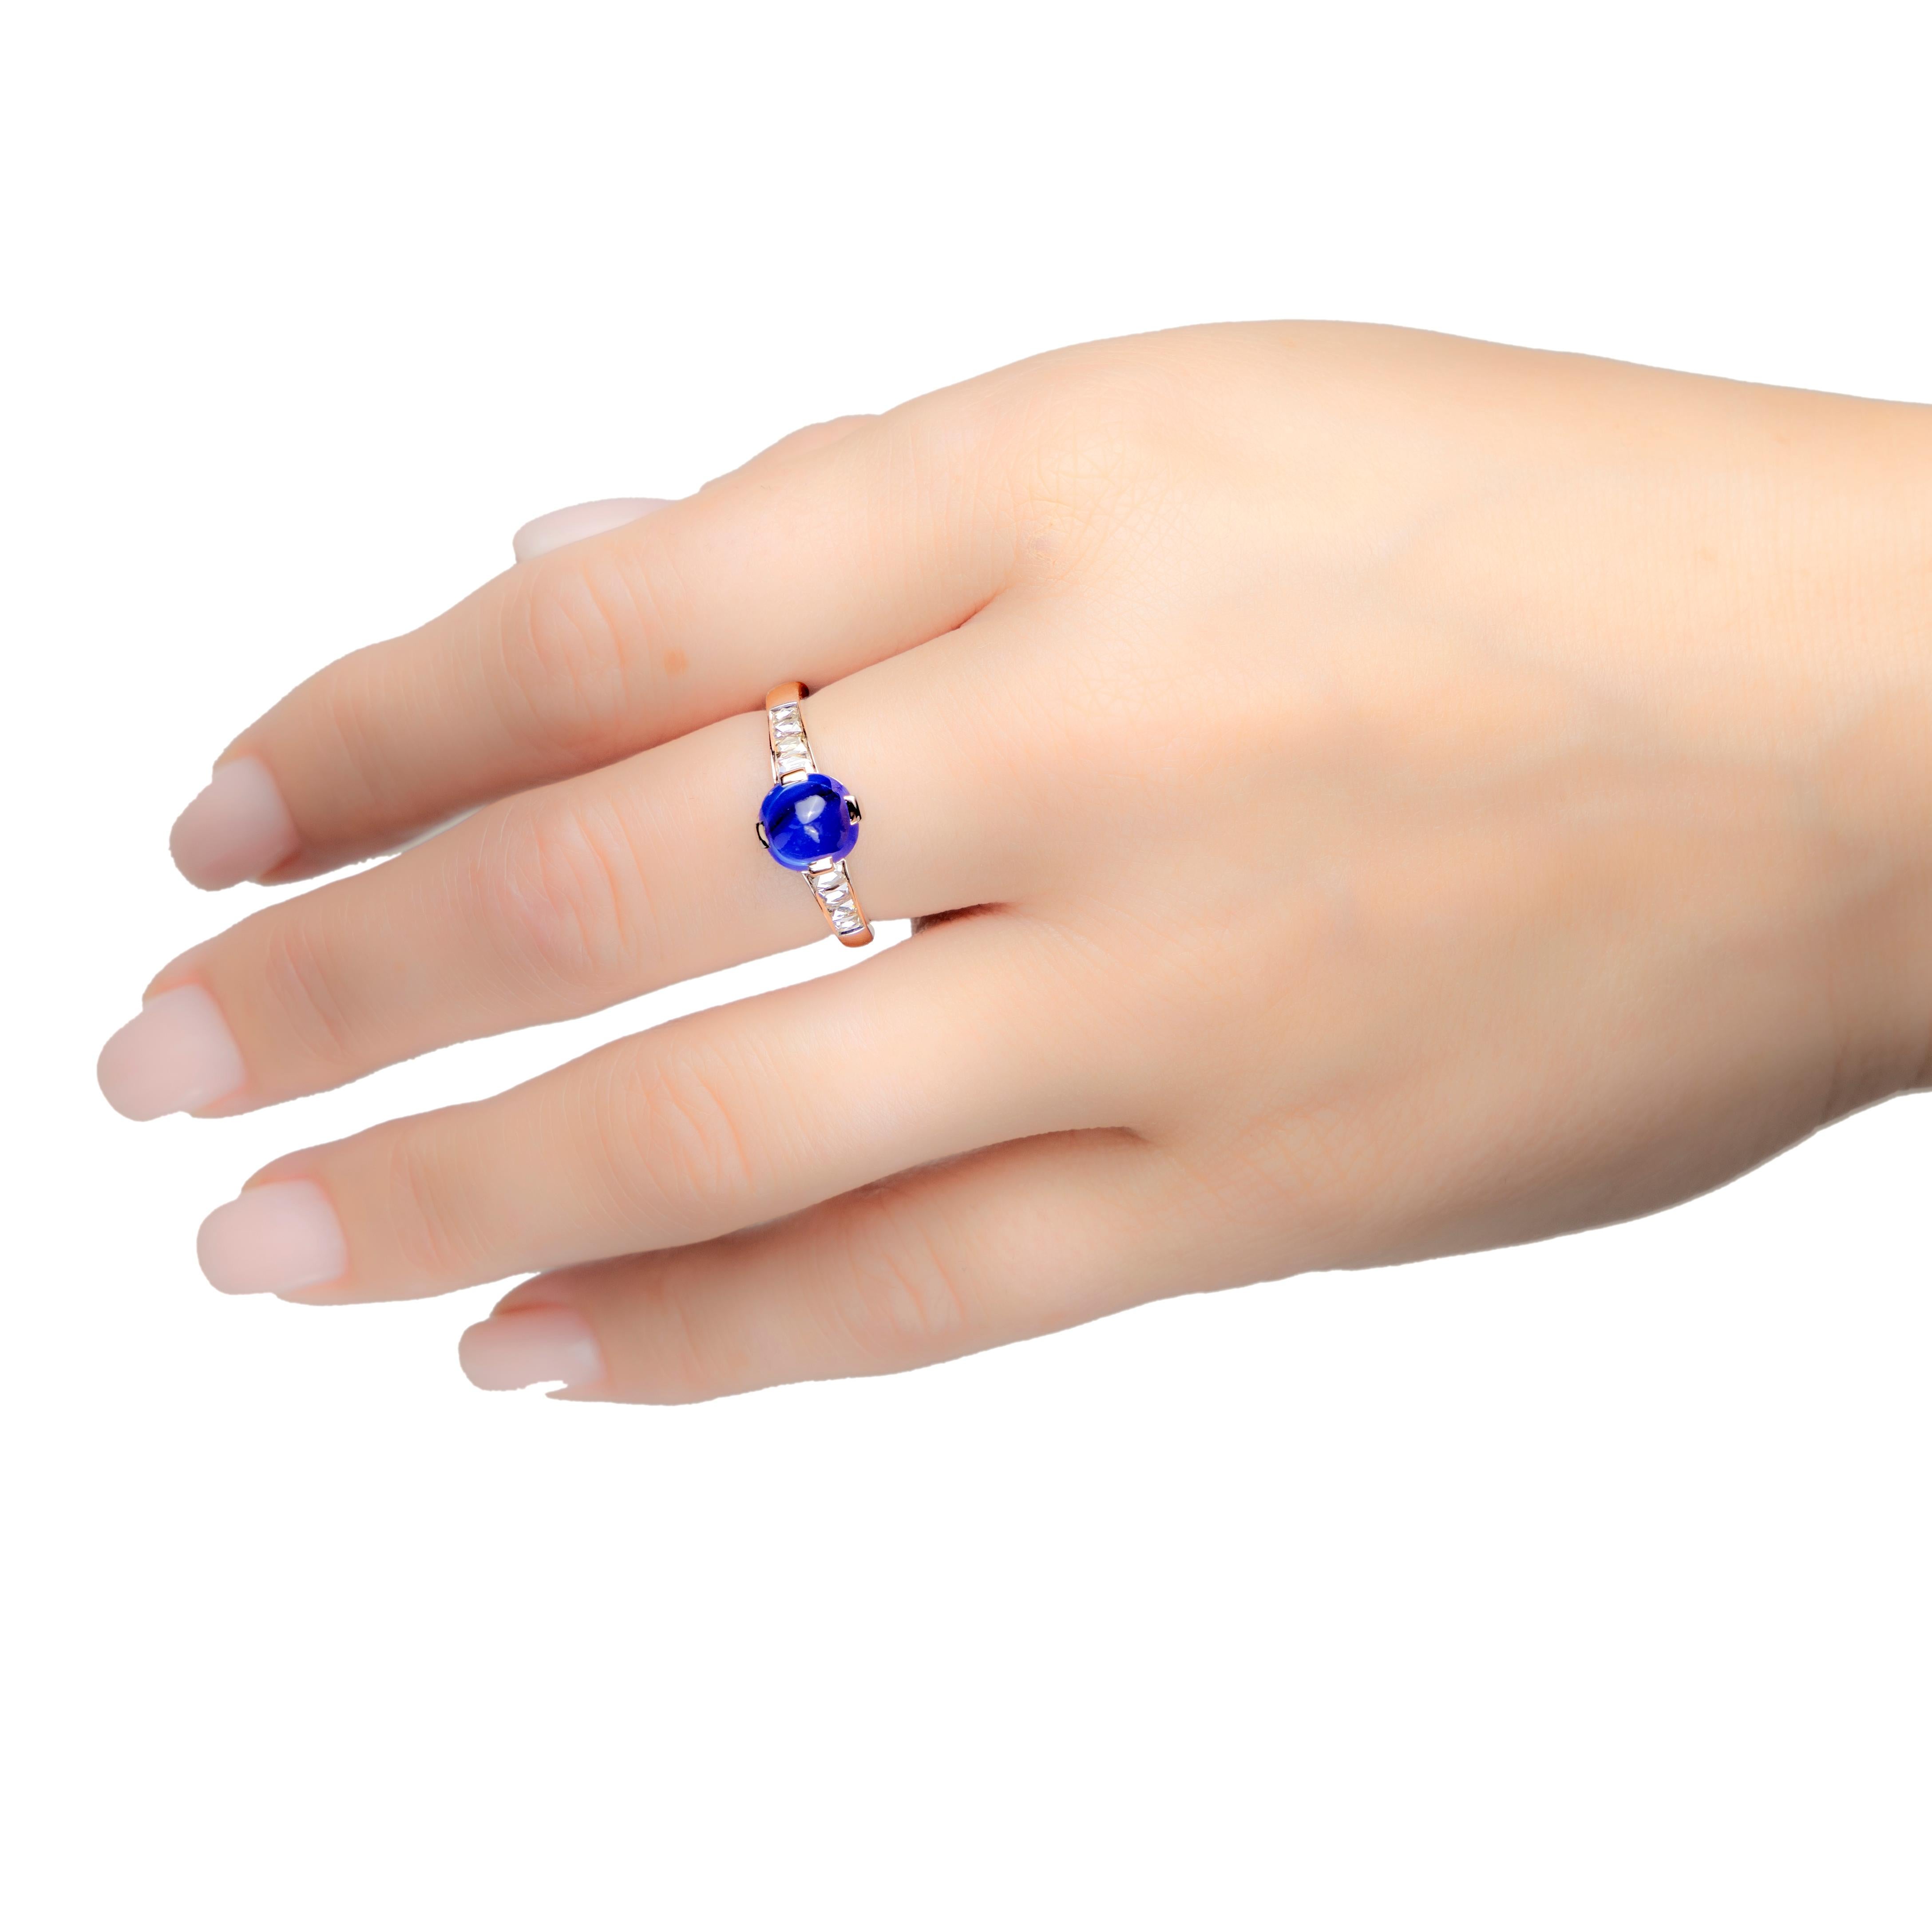 Sugarloaf Cabochon Leon Mege ring with certified Kahmir sugarloaf sapphire and French cut diamonds For Sale